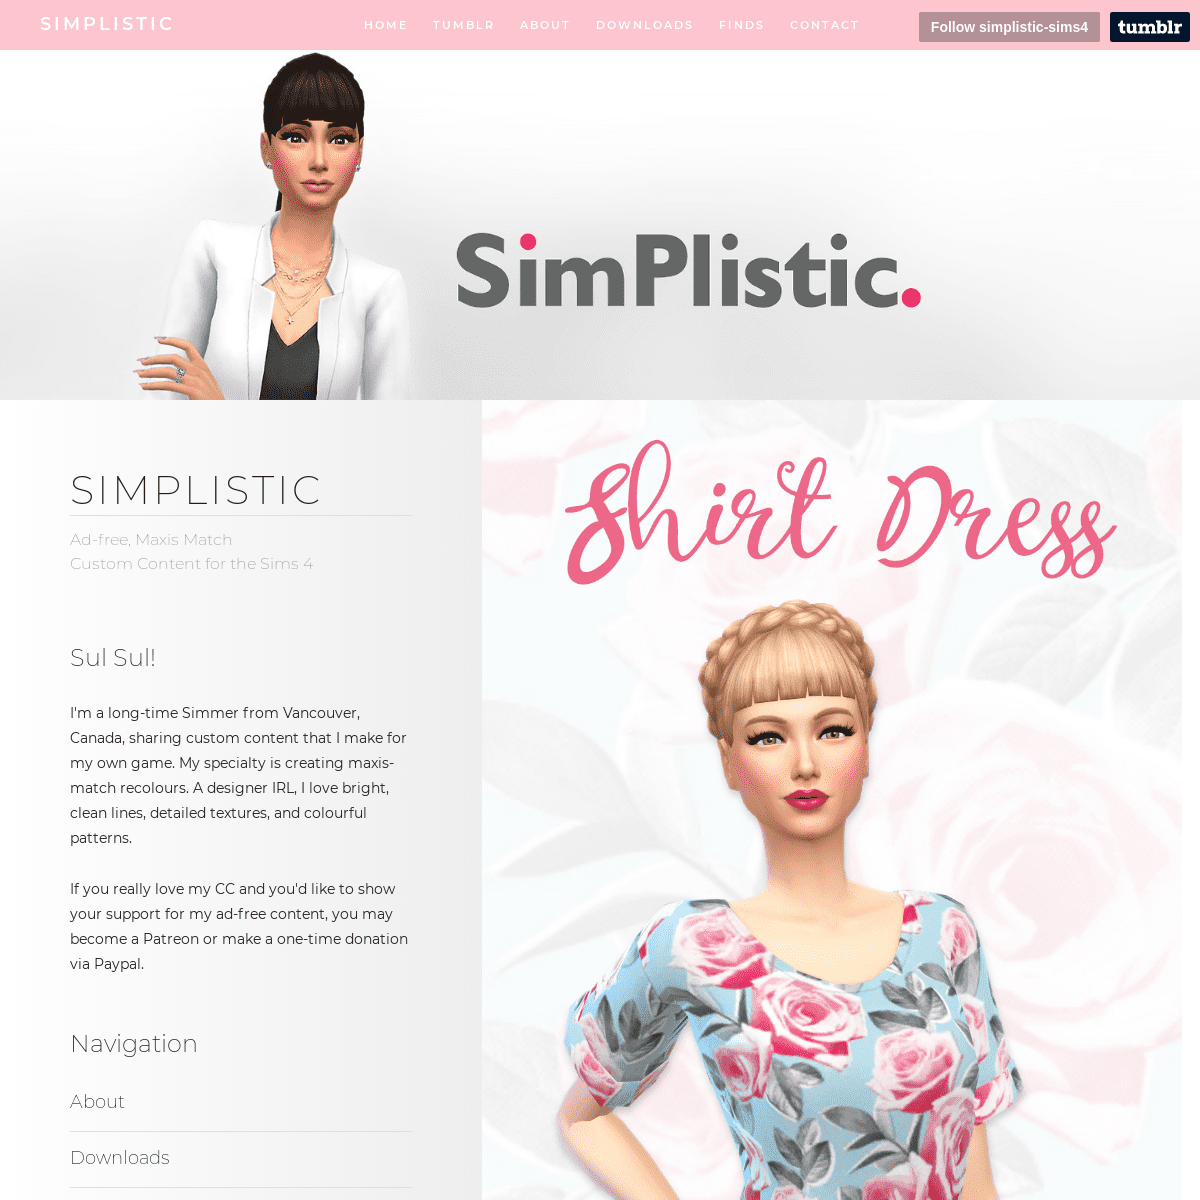 A complete backup of simplistic-sims4.tumblr.com